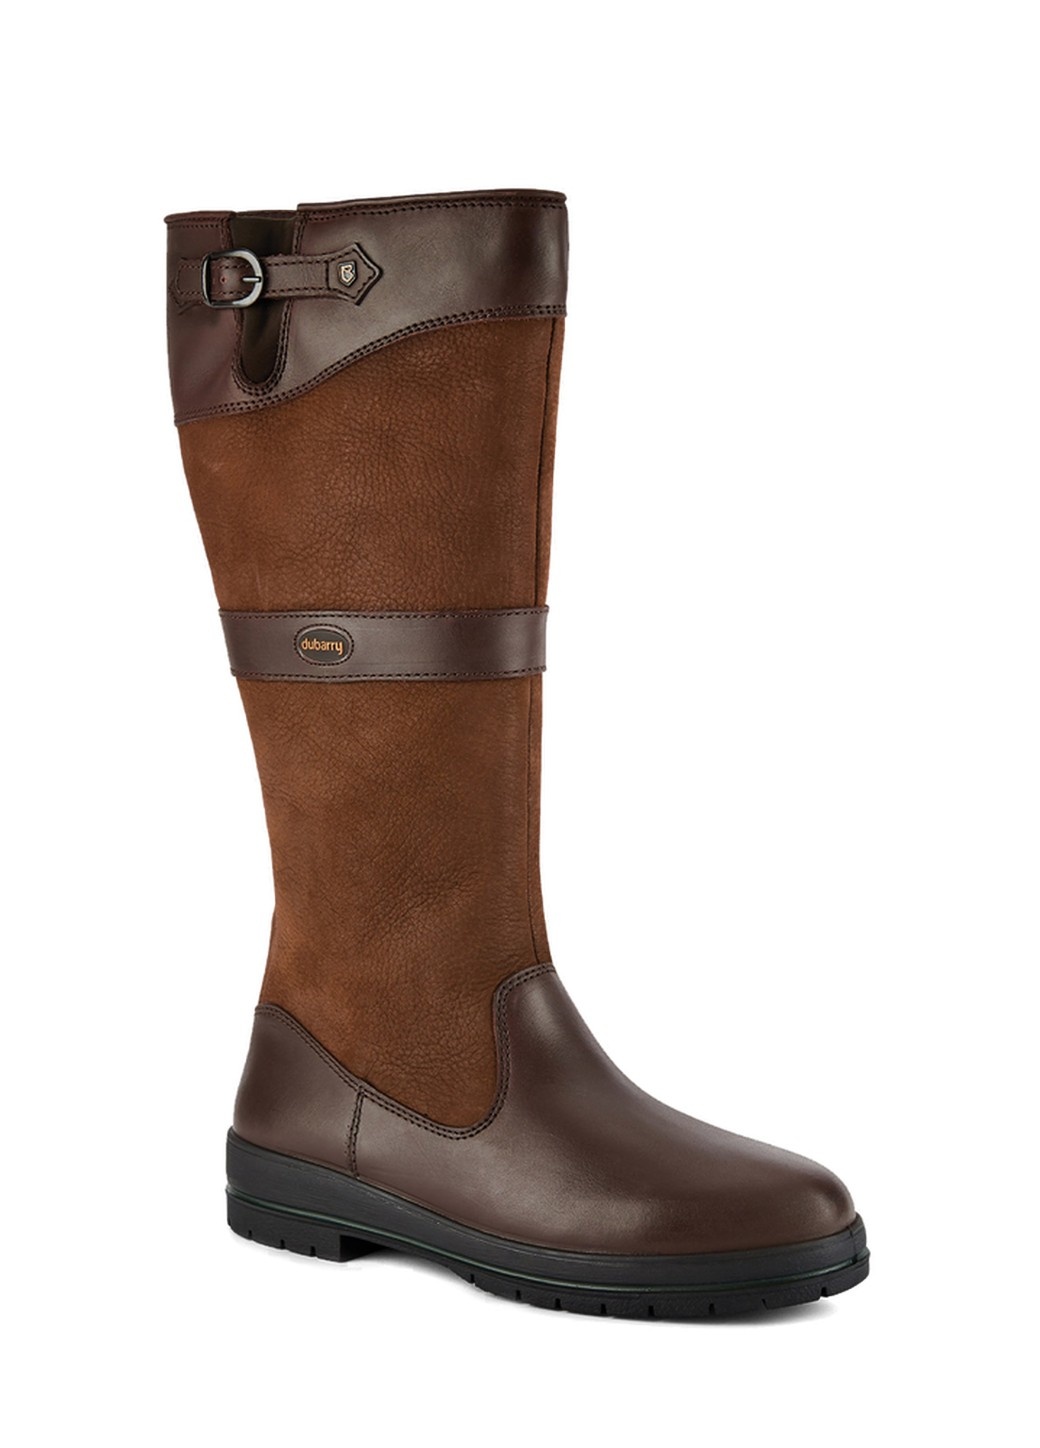 Dubarry Dunmore Country Boot - Walnut-2